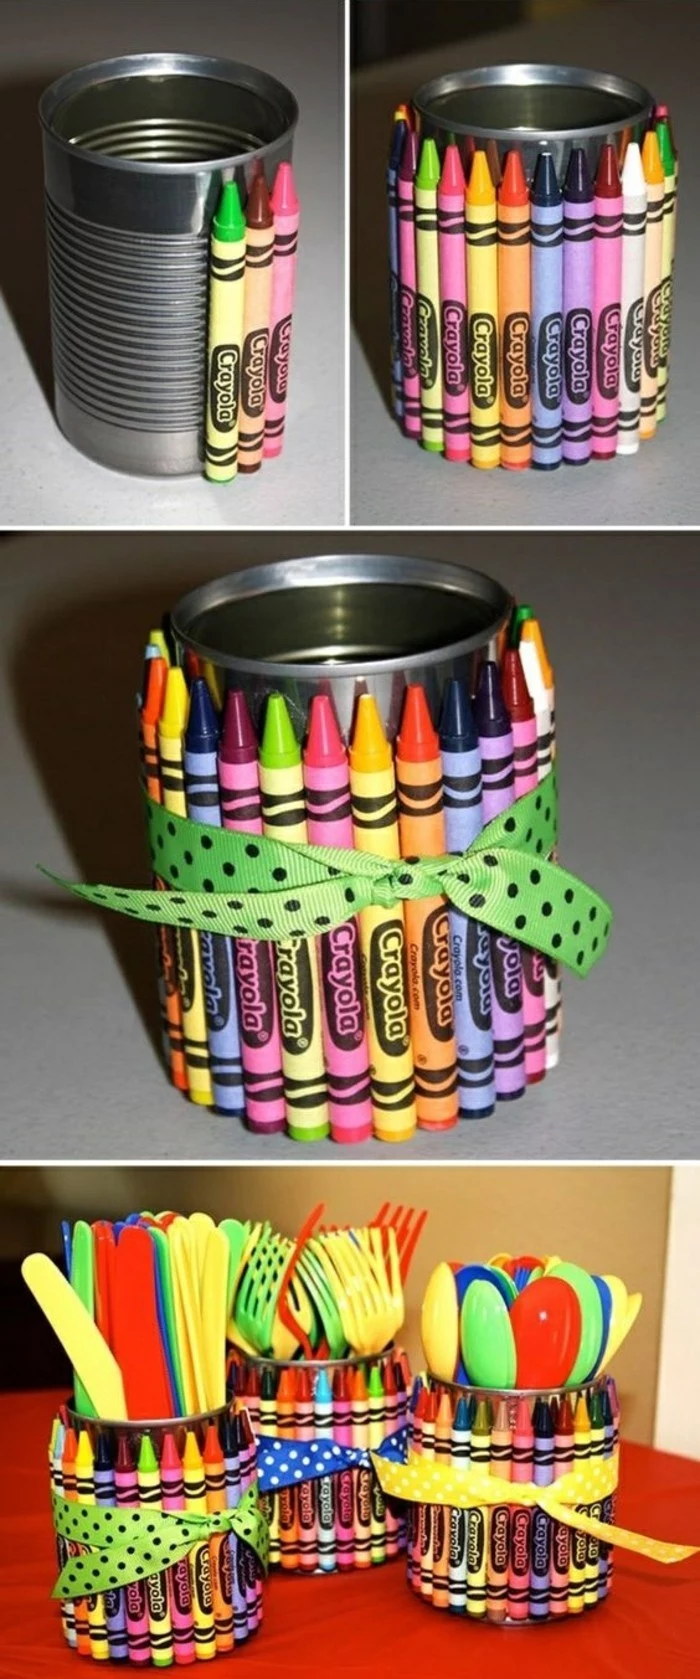 tin cans, aluminium cans decorated with colored crayons, tied with green ribbon with black polkadots, containing plastic cutlery in different colors